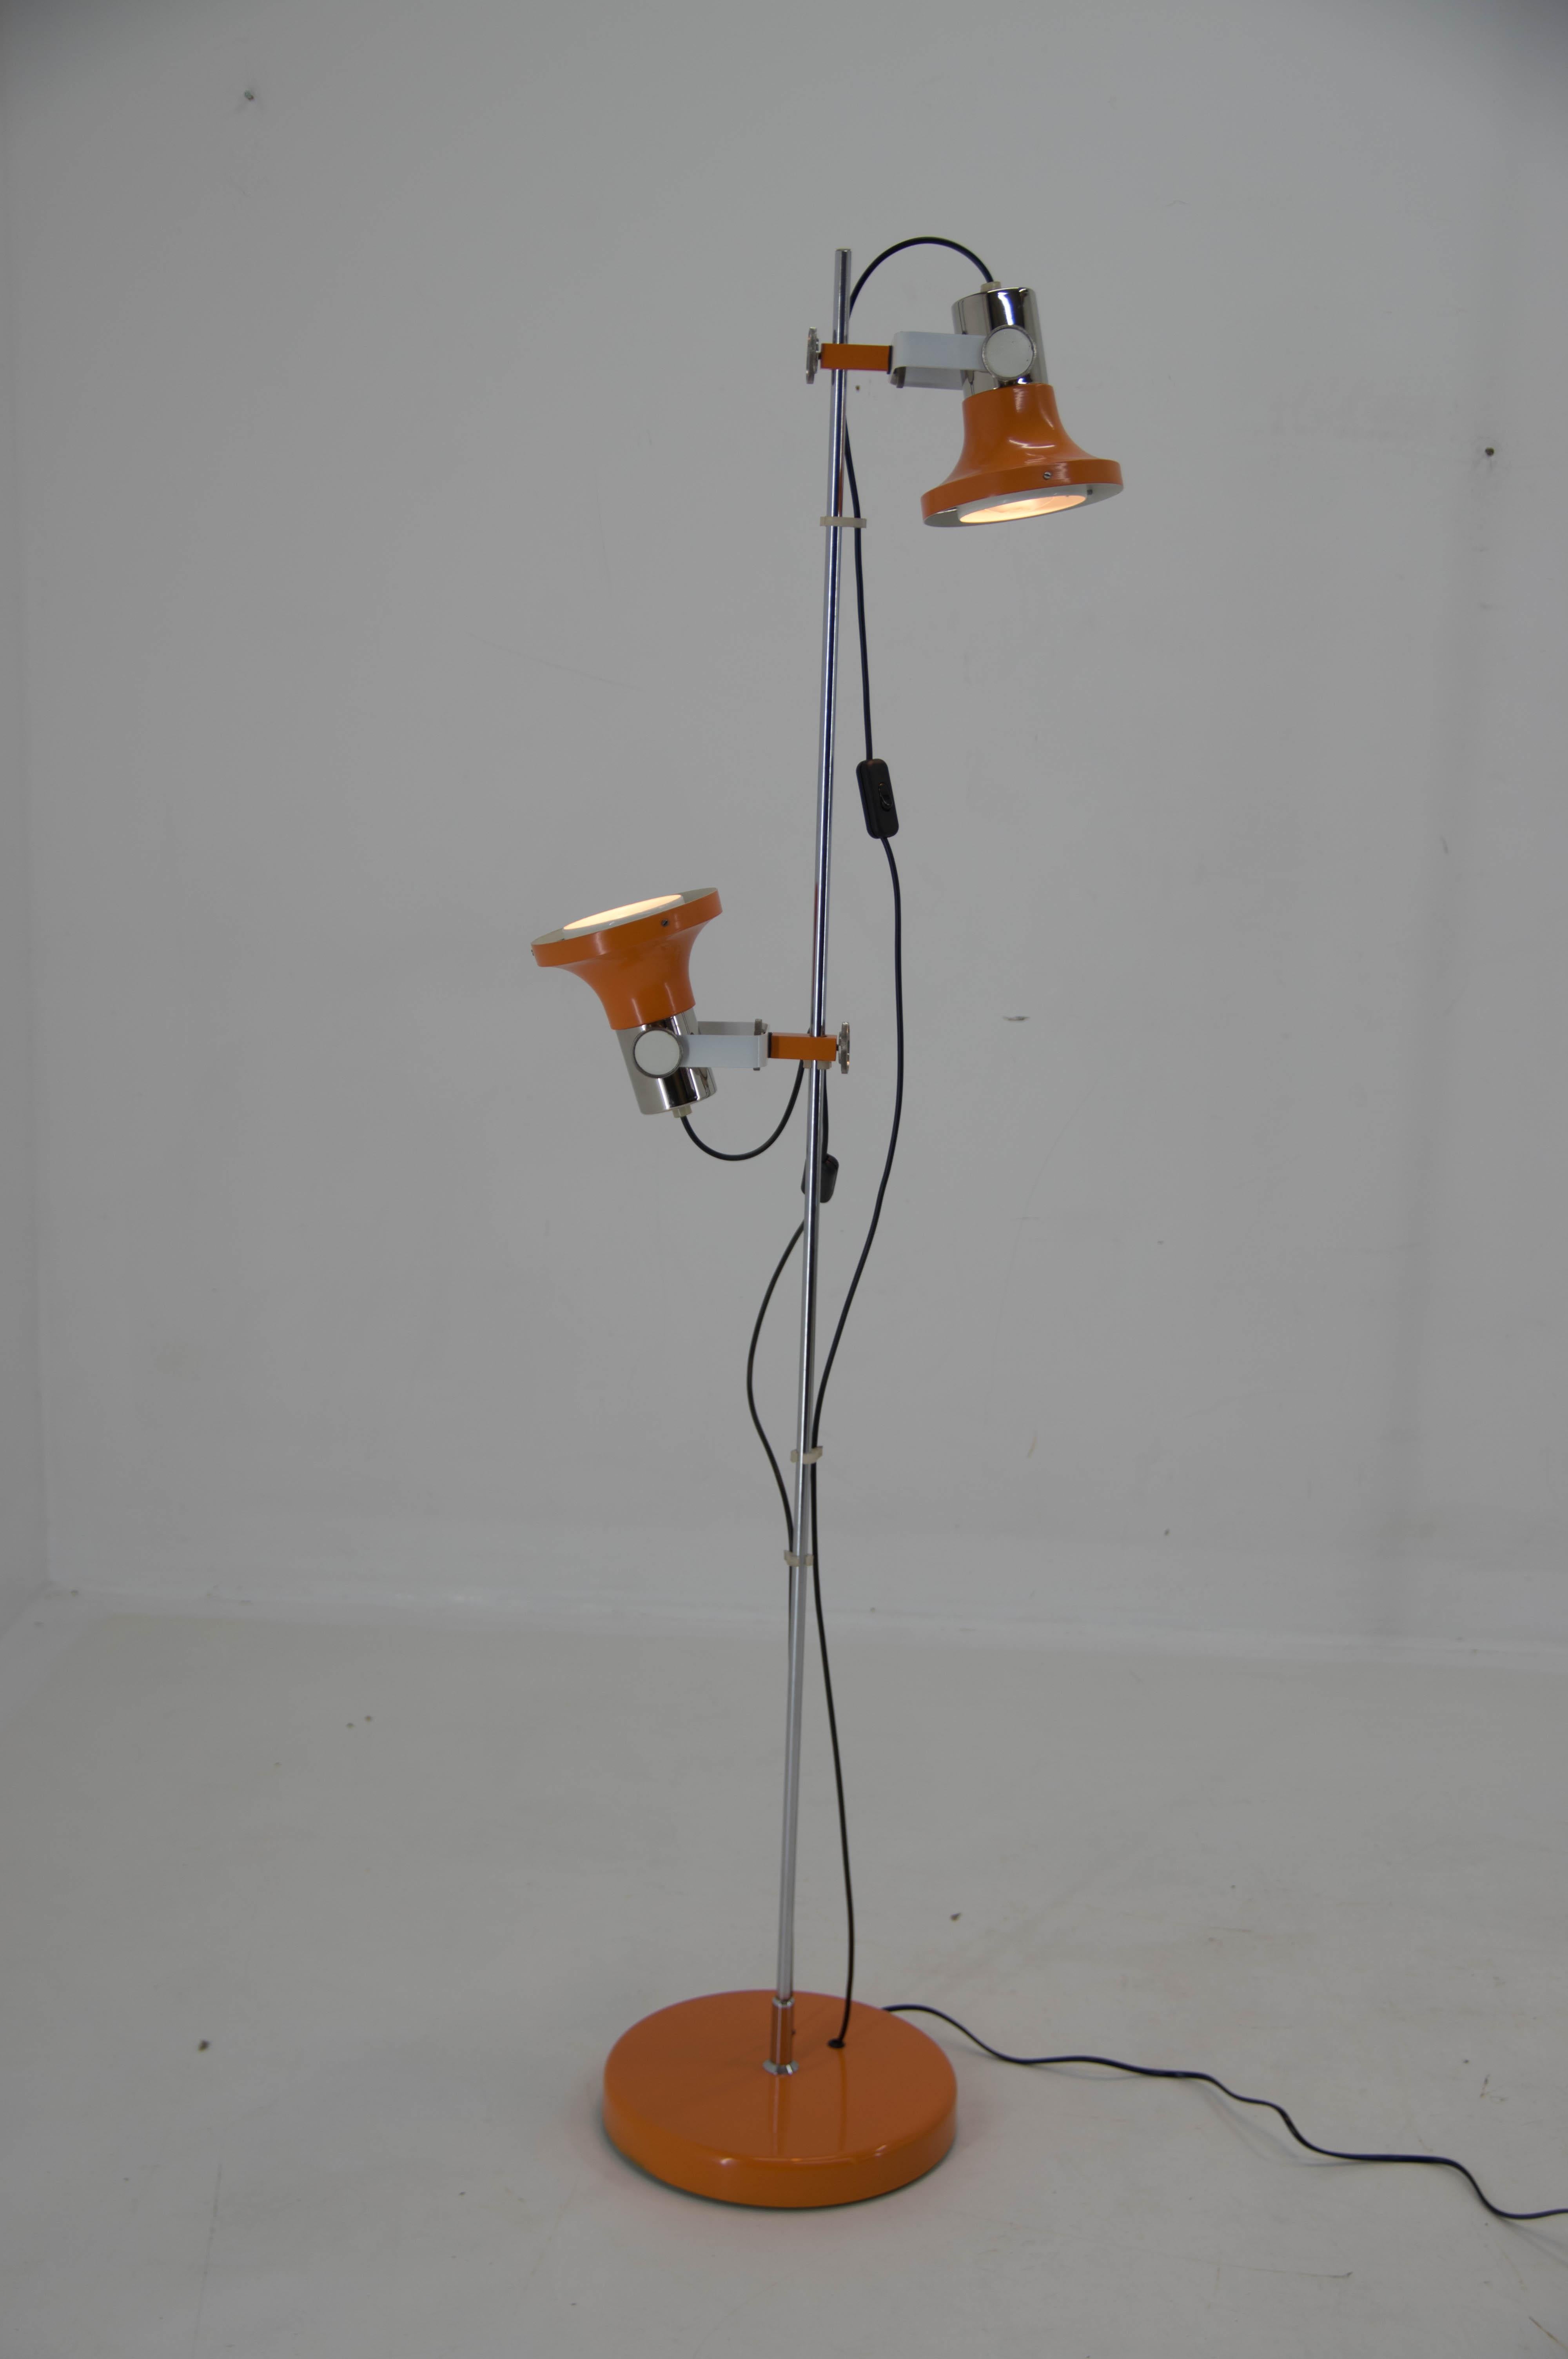 Czech Midcentury Floor Lamp by Pavel Grus, 1960s, Excellent Condition